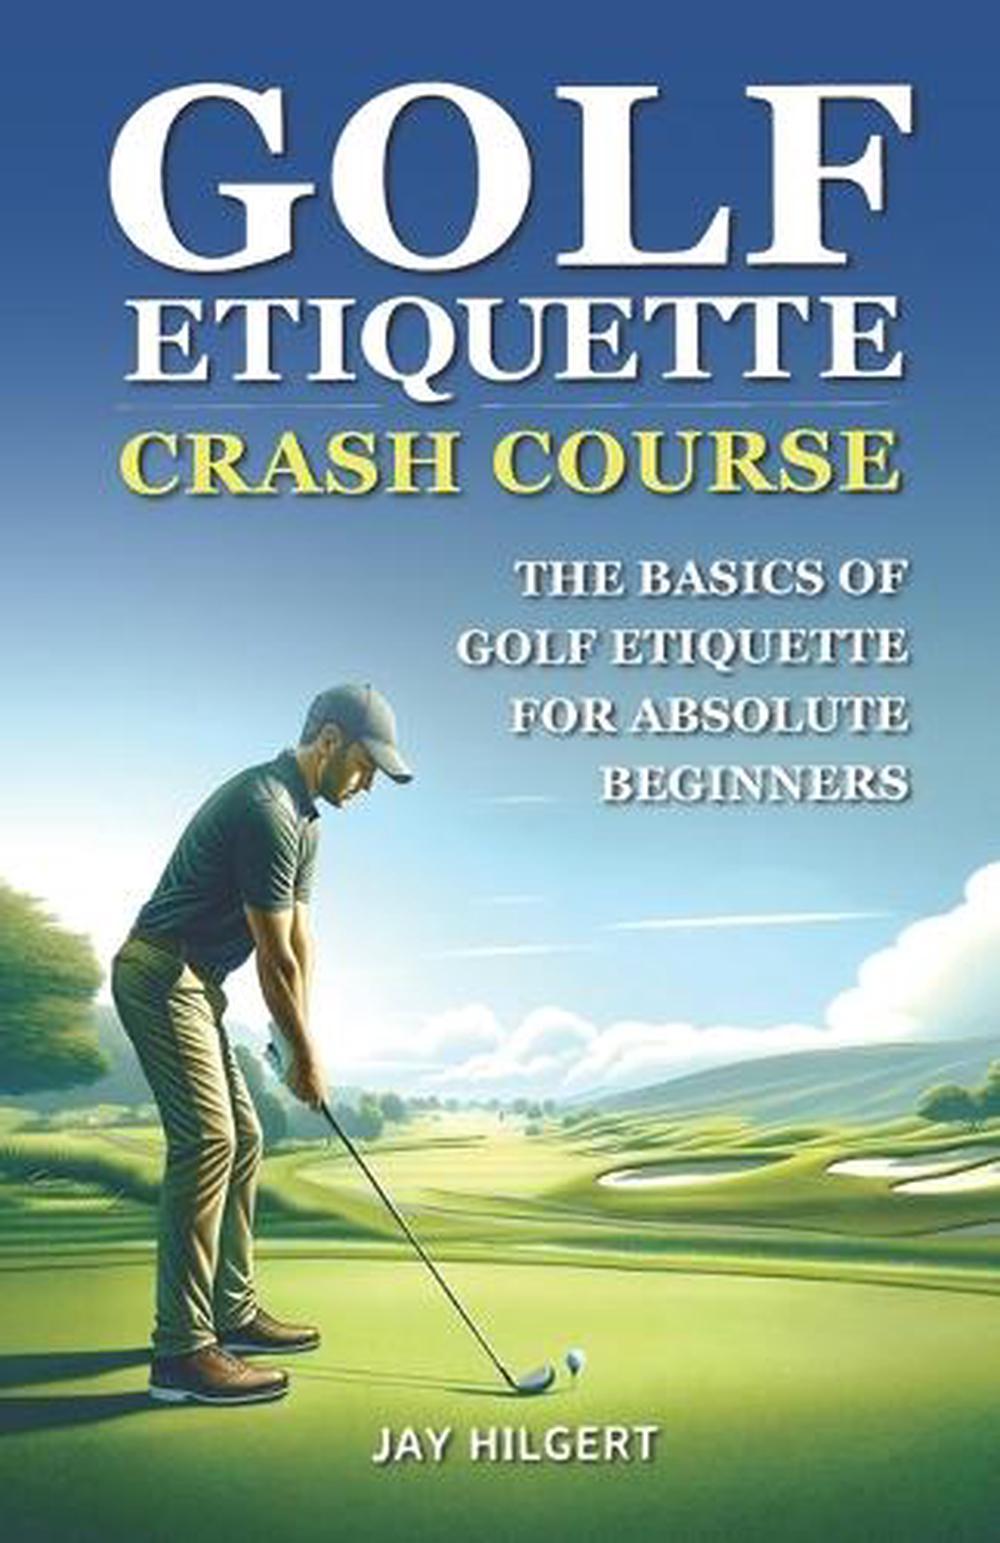 Golf Etiquette Crash Course: The Basics of Golf Etiquette for Absolute Beginners - Picture 1 of 1